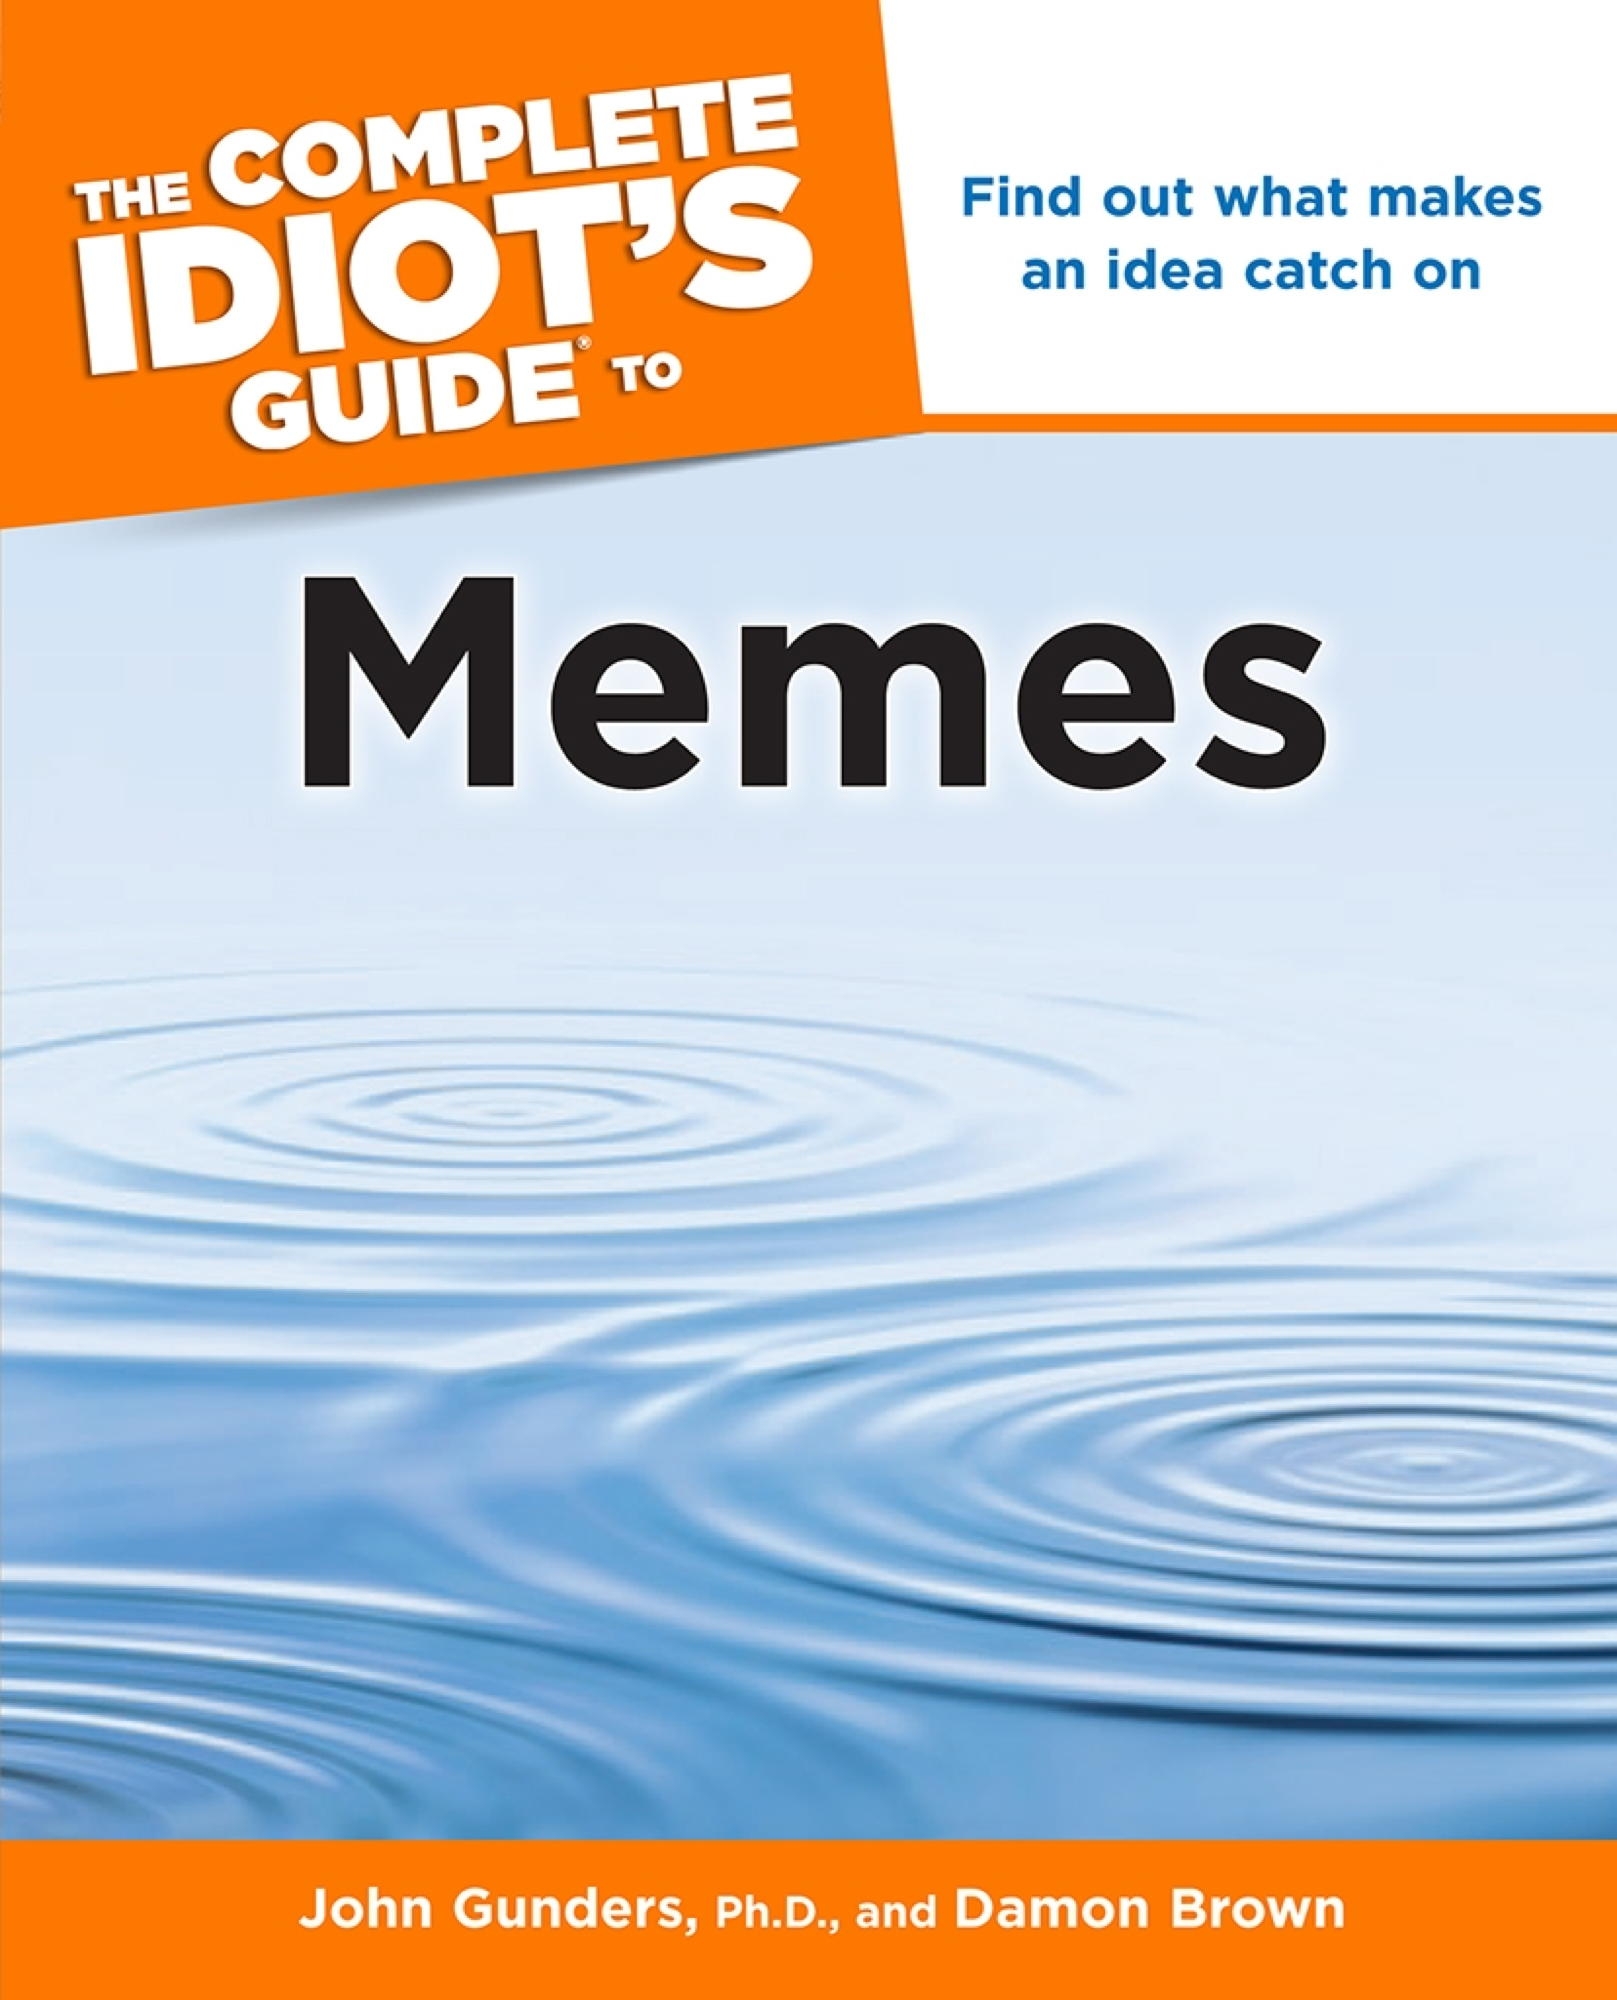 The Complete Idiot's Guide to Memes